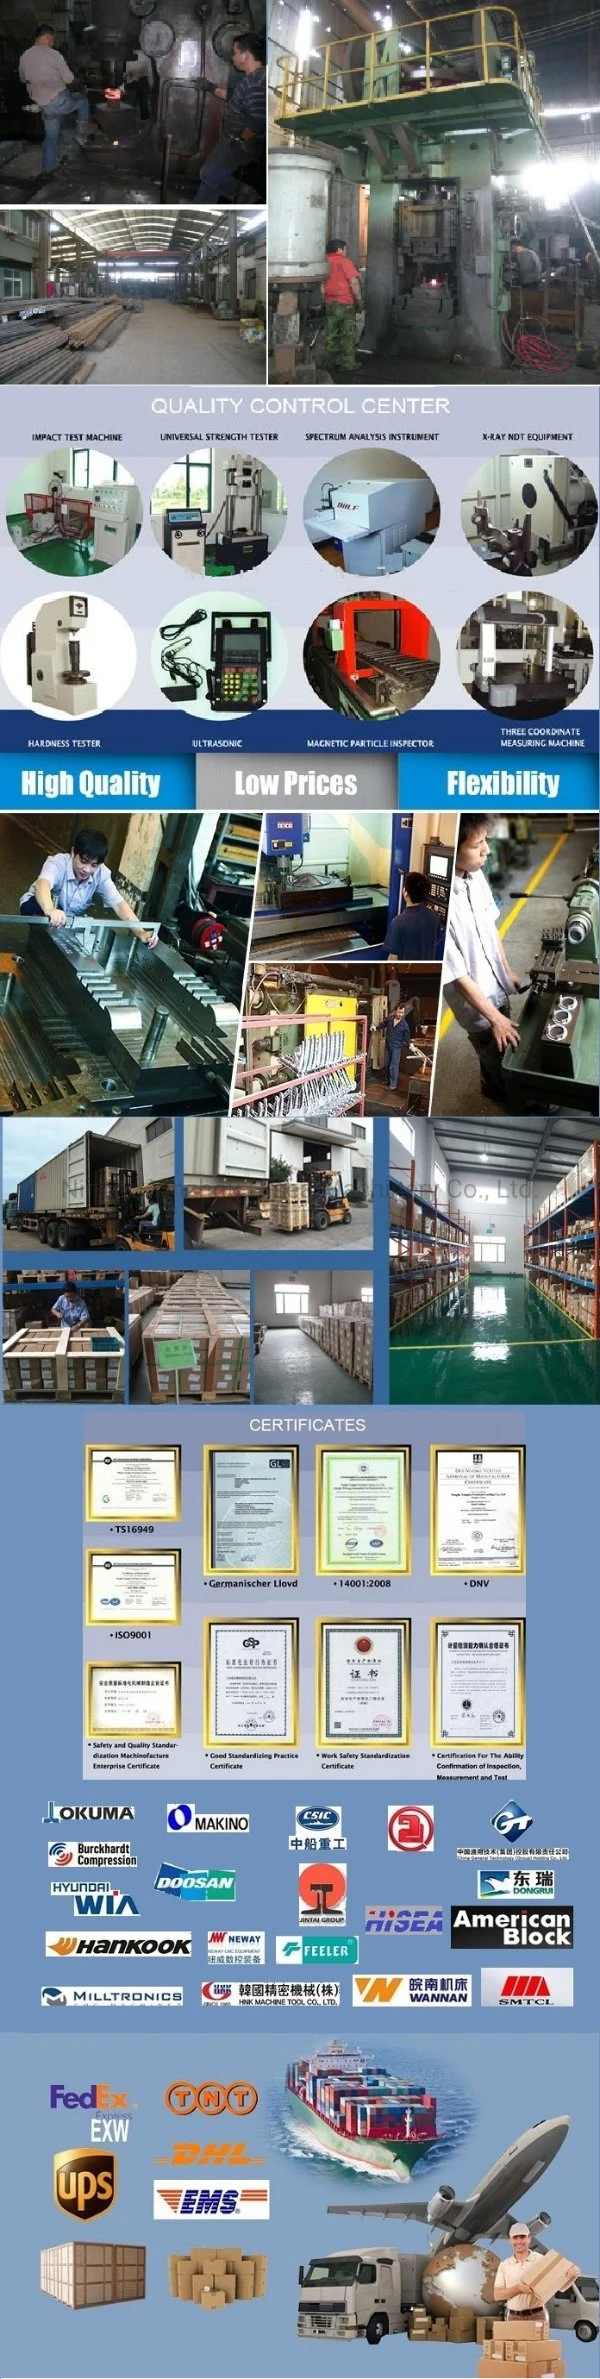 OEM High Precision Machinery Parts Construction Equipment Spare Parts